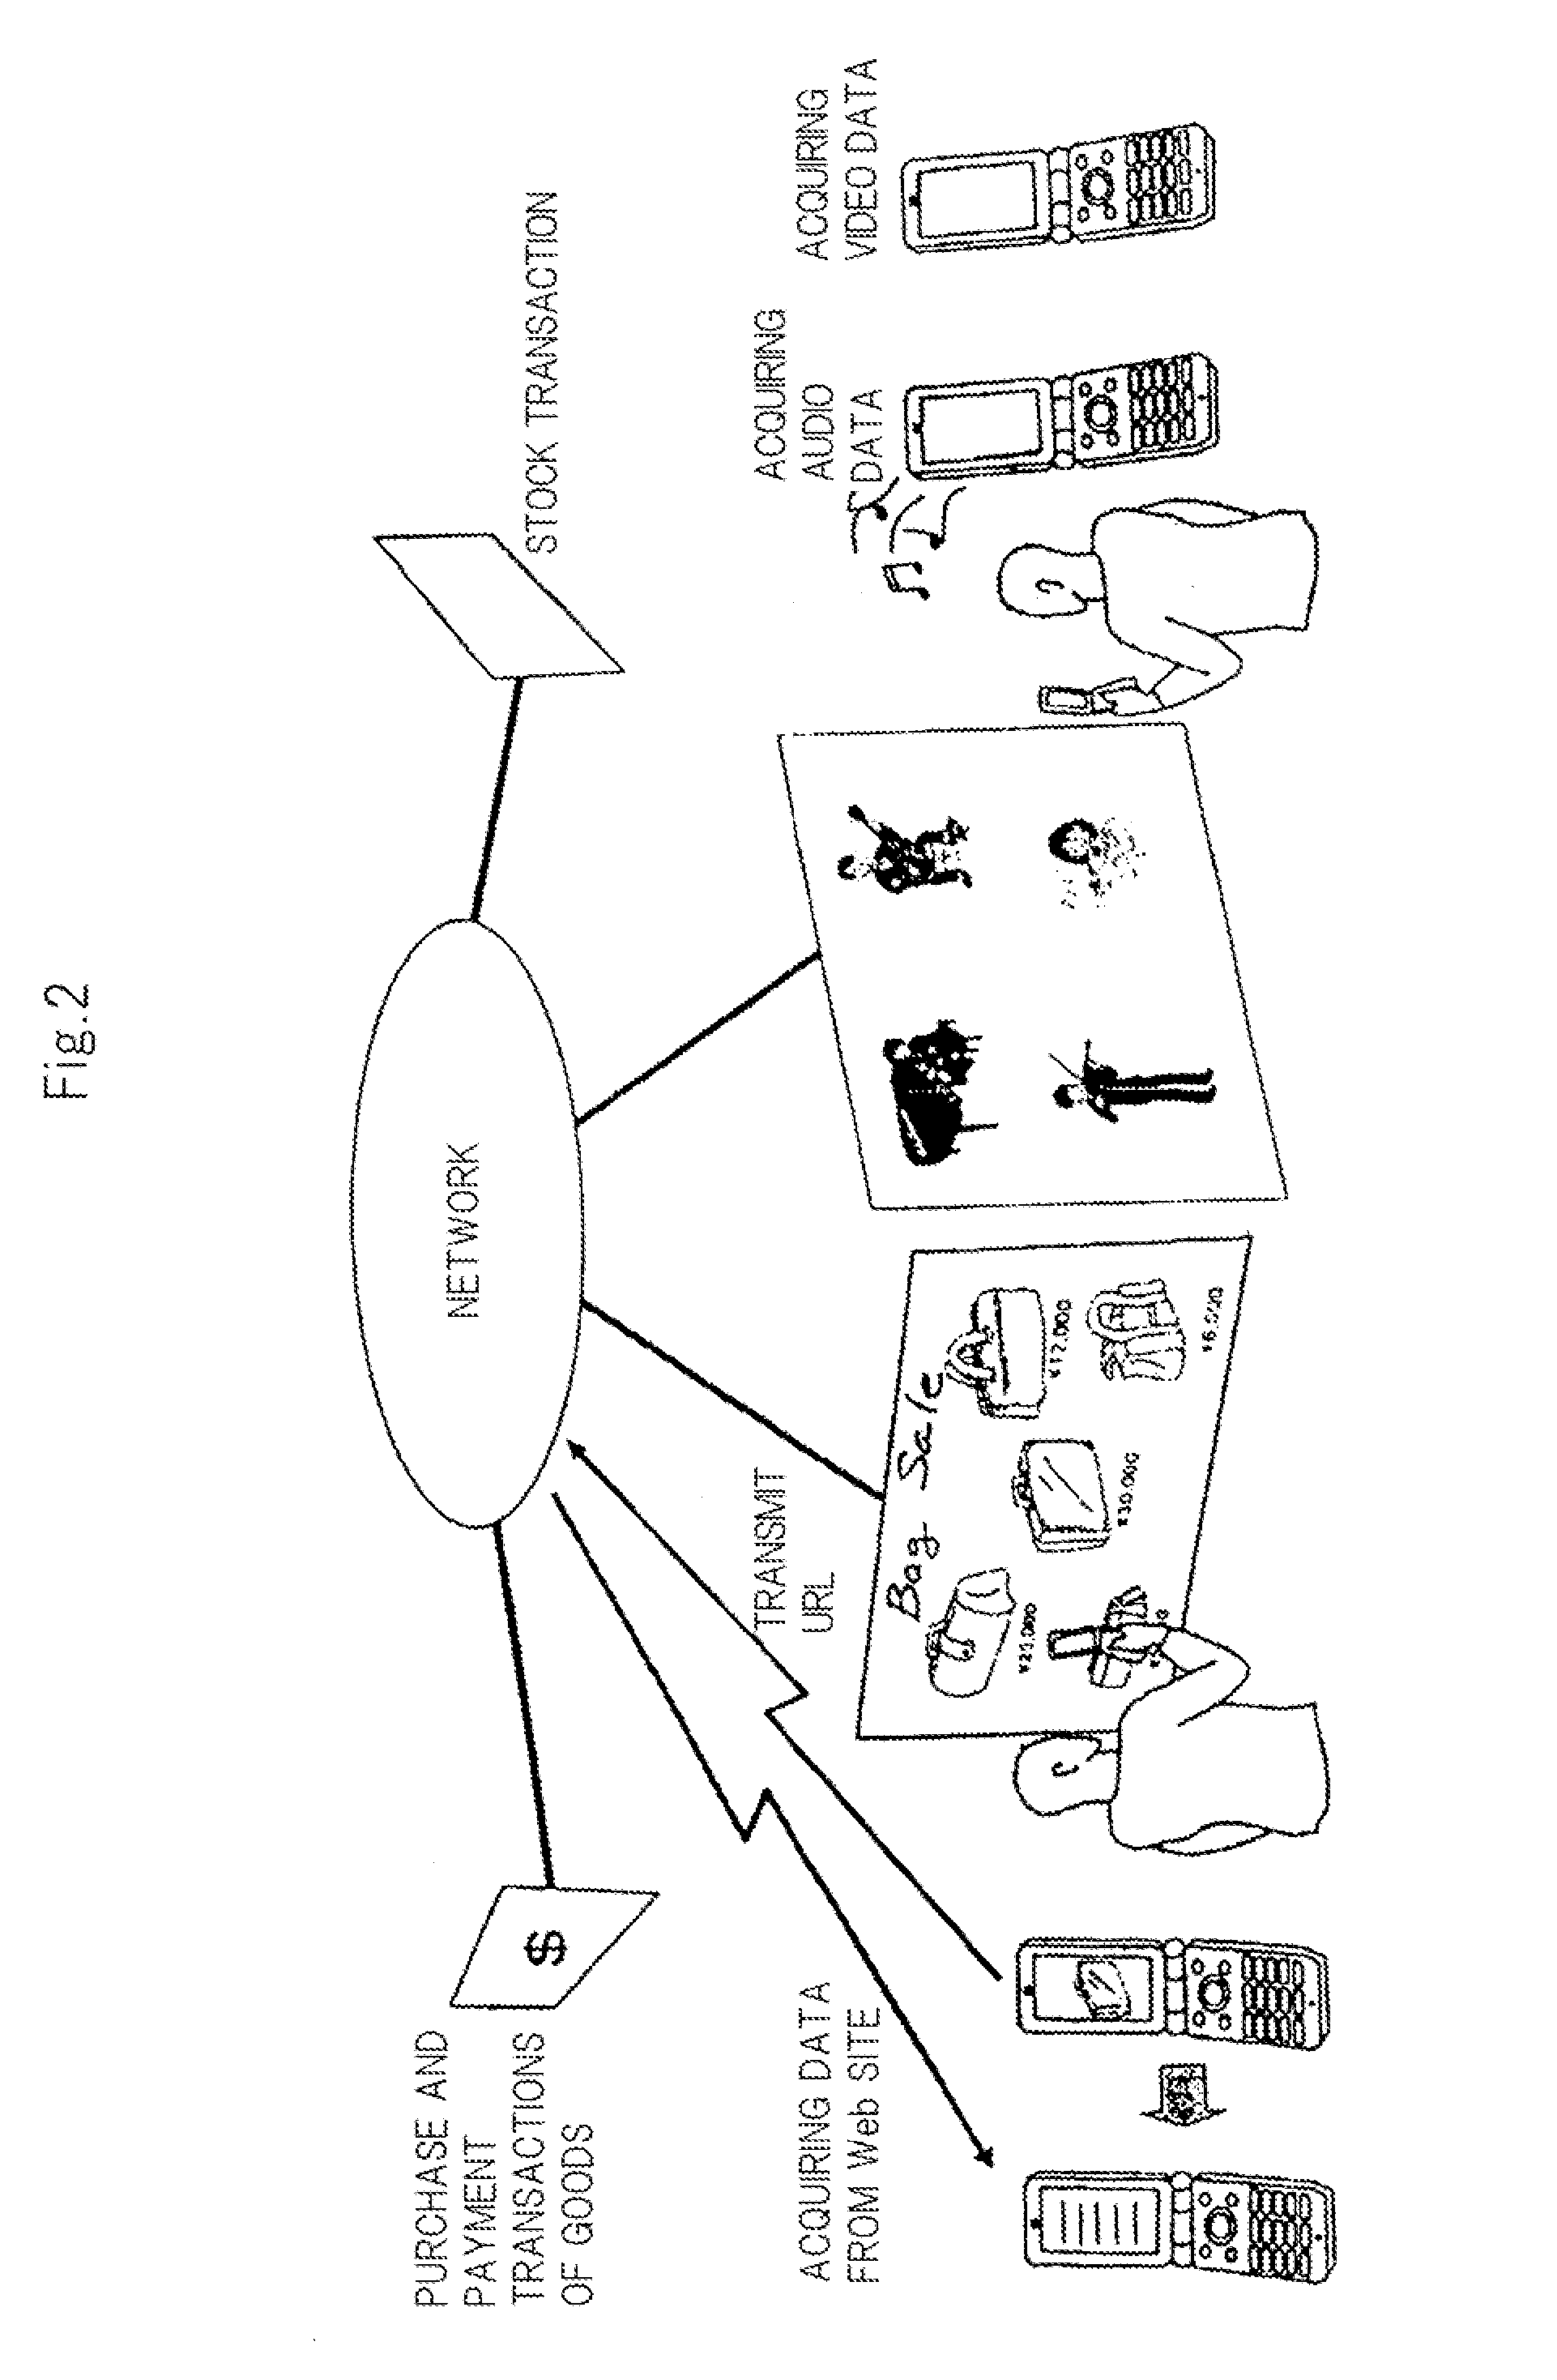 Communication system and receiver